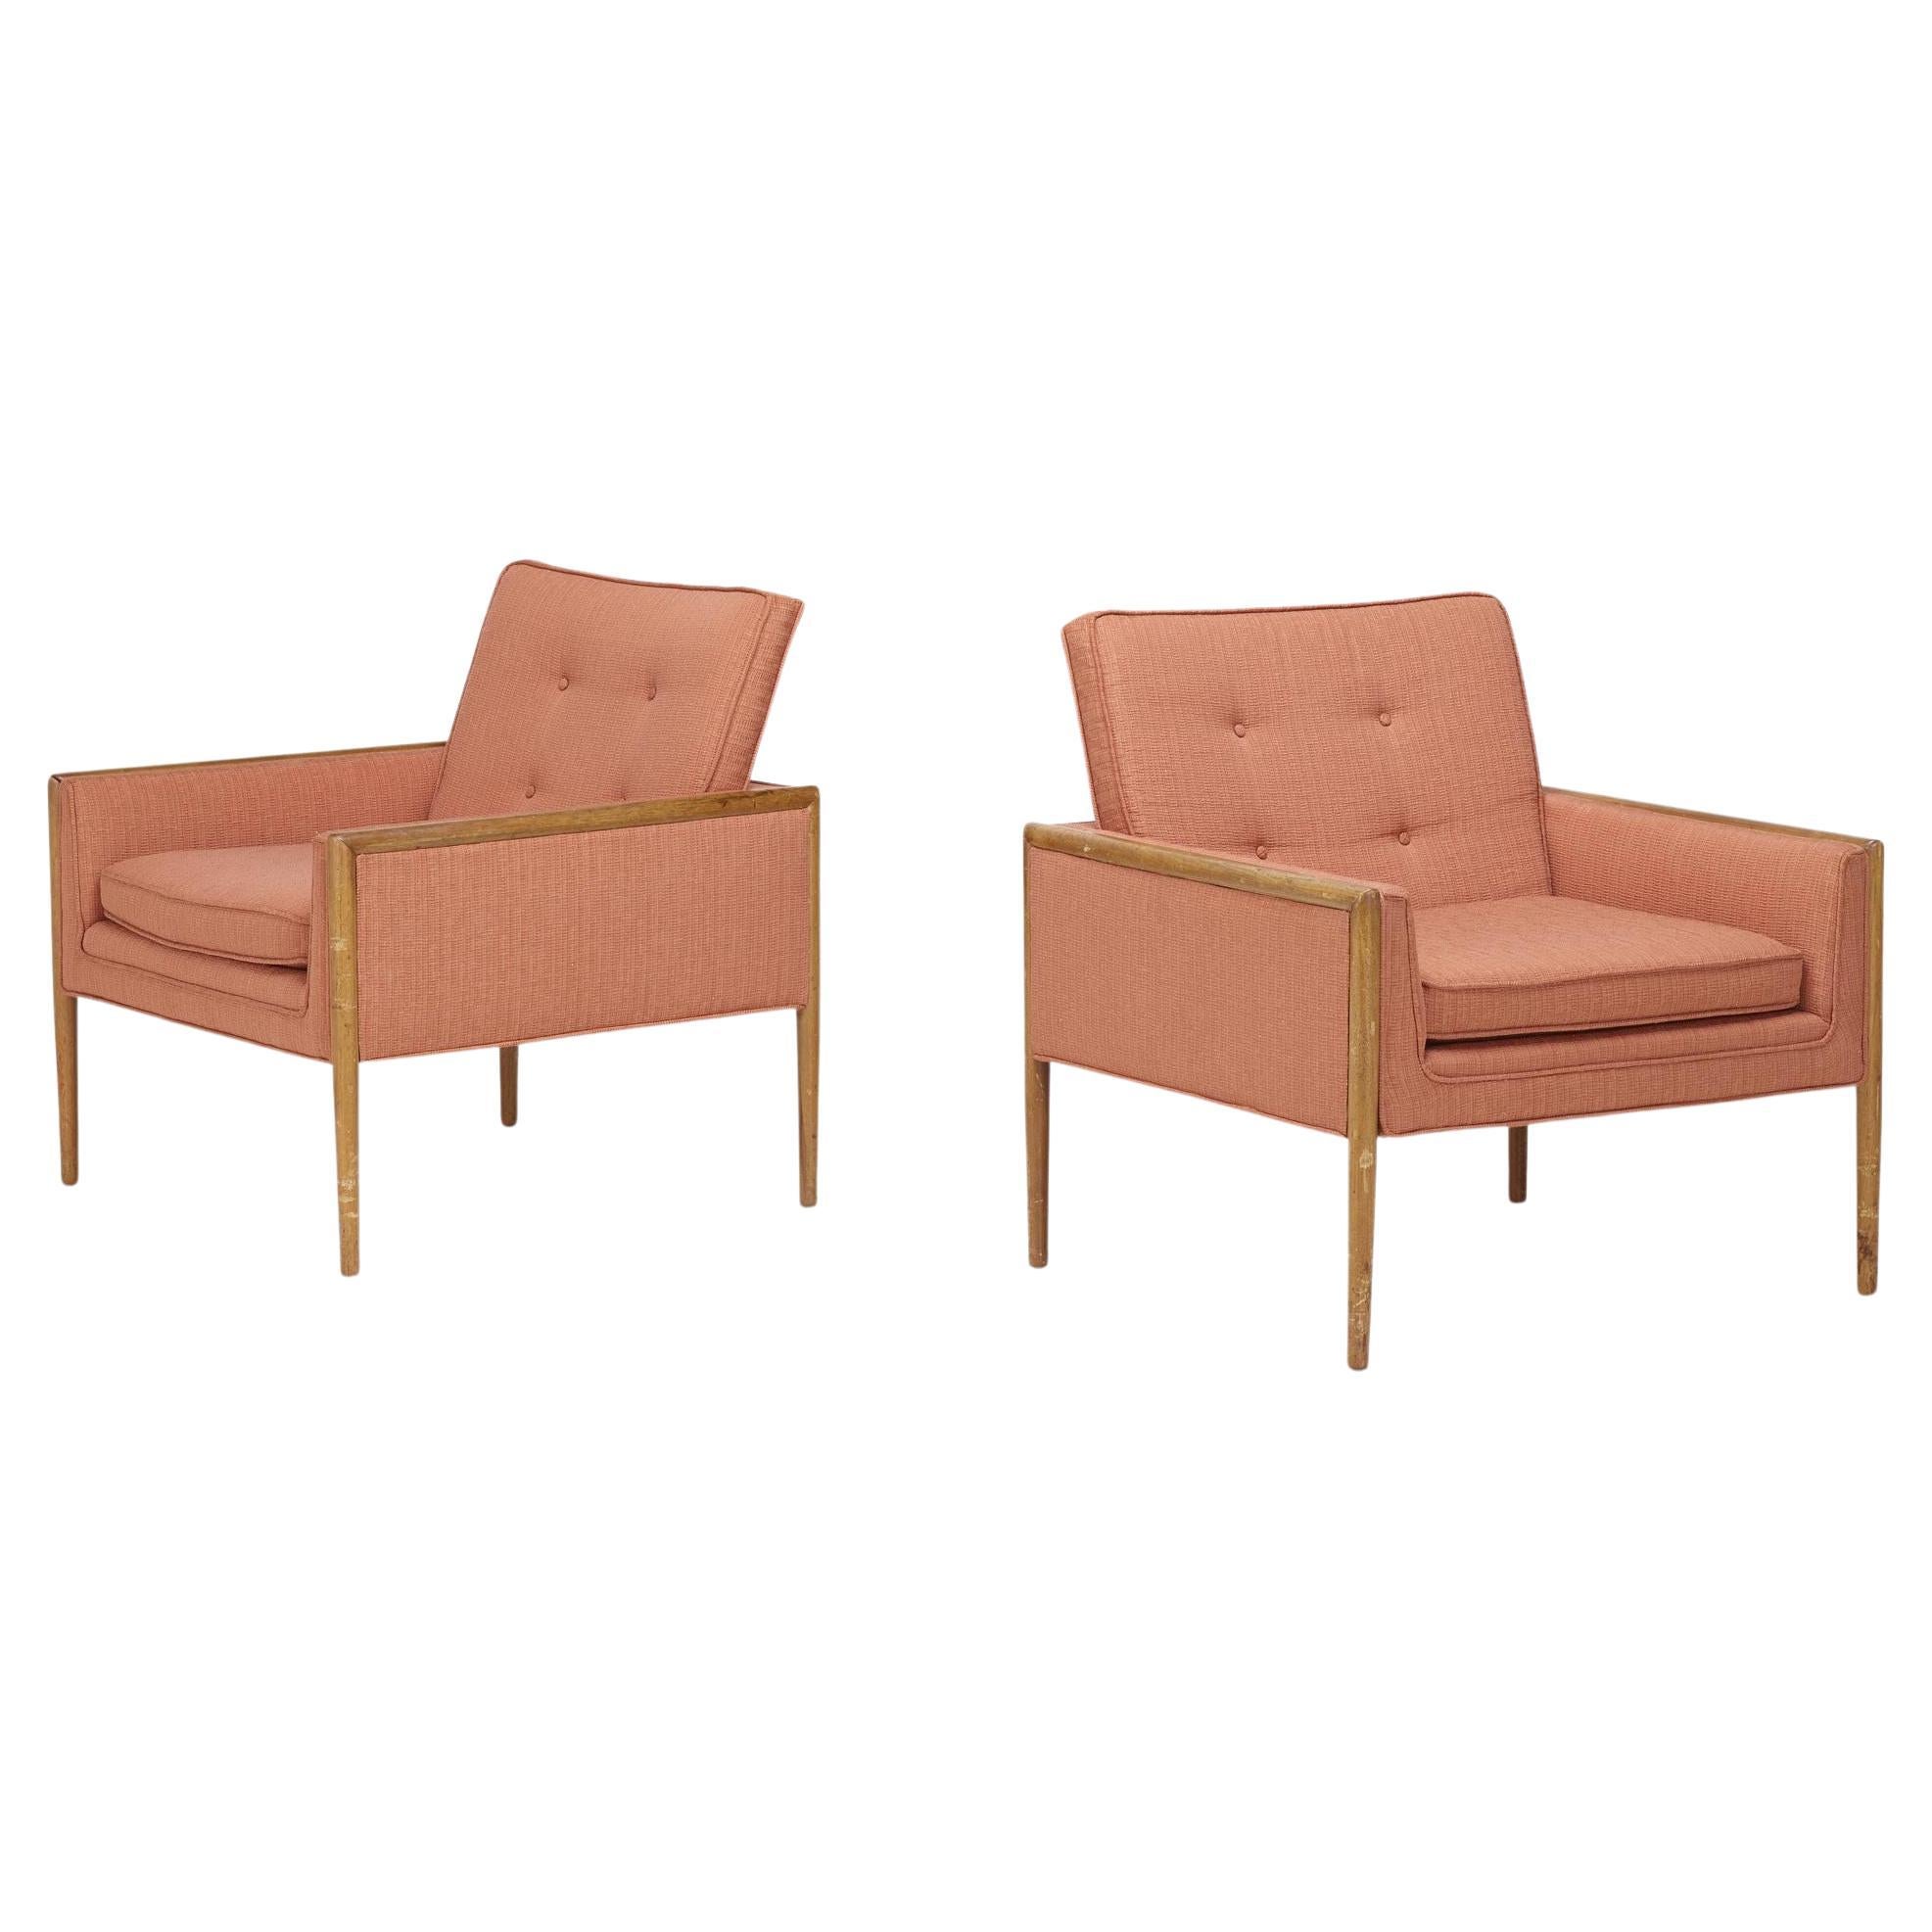 Pair of Mid-Century Modern Lounge Chairs, American, Walnut, 1960s For Sale